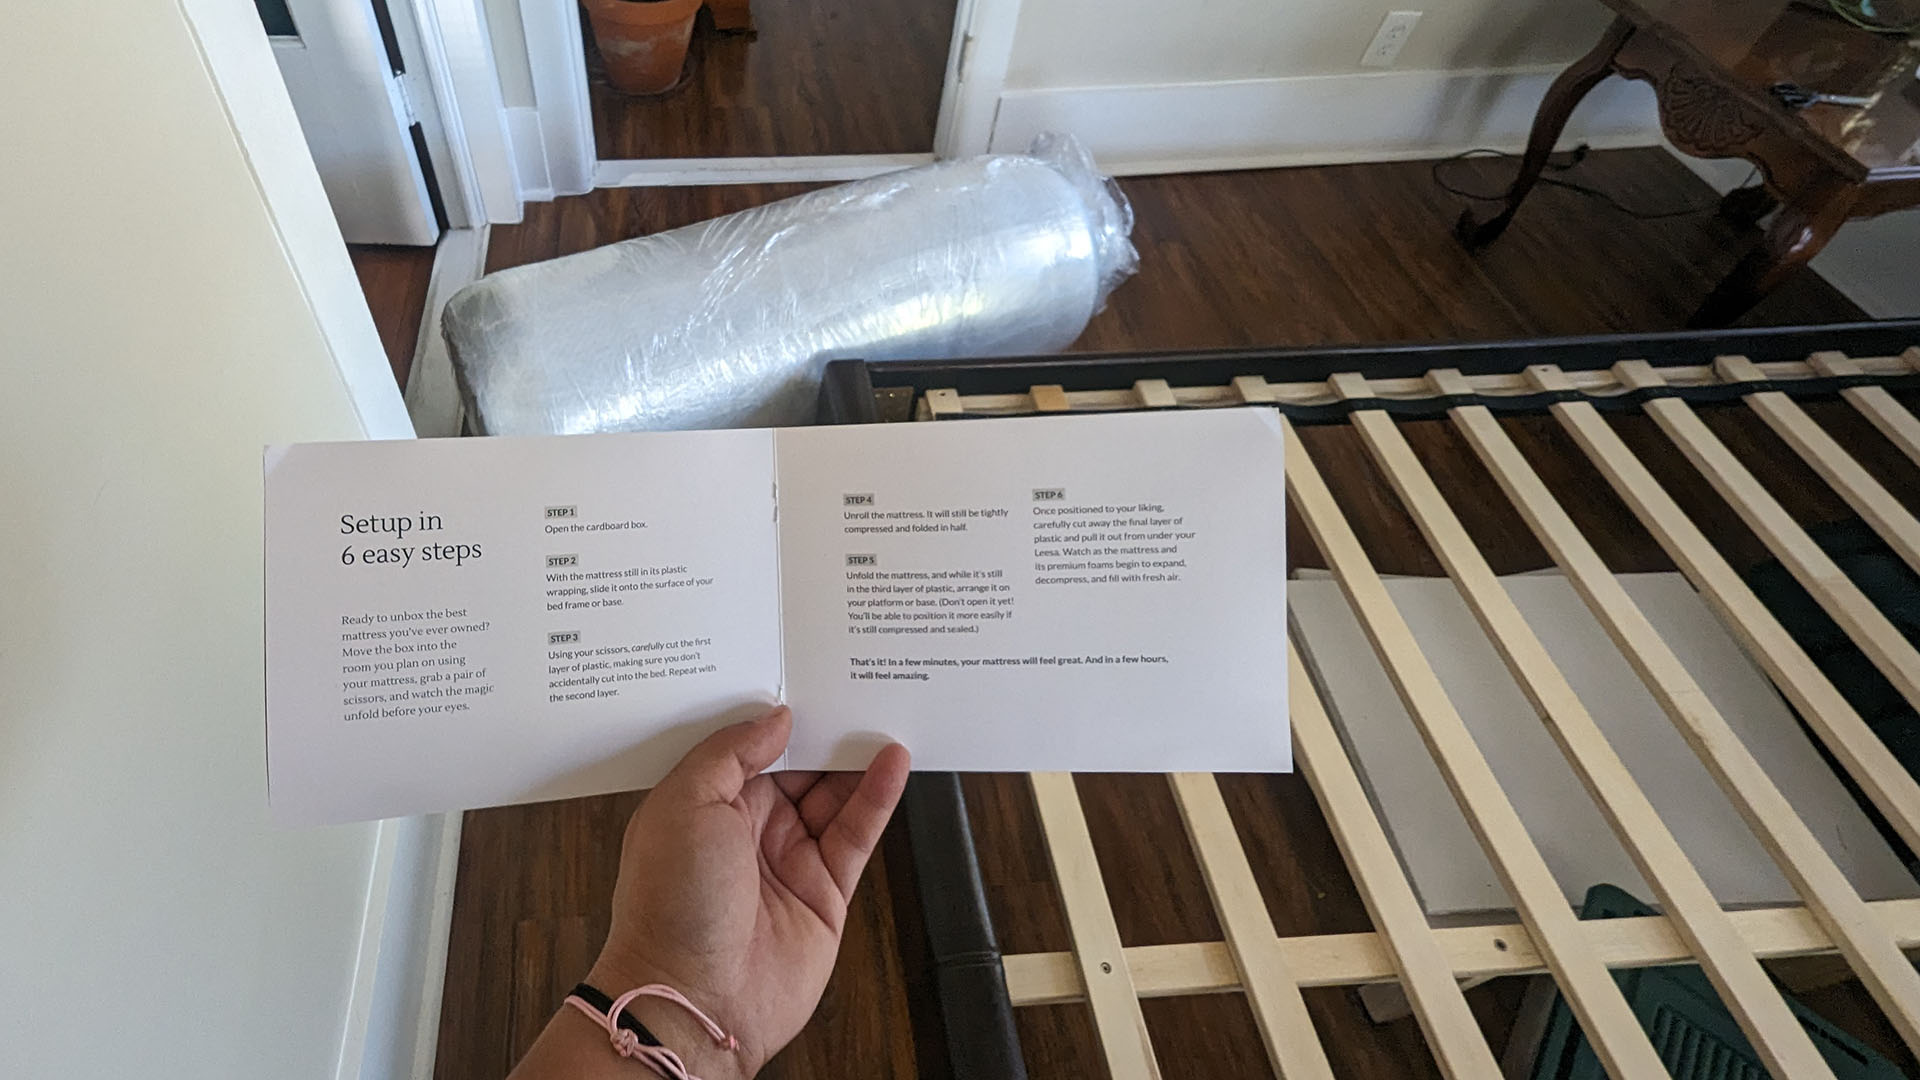 Leesa Oasis Chill Hybrid mattress out of its box, but still in plastic wrapping